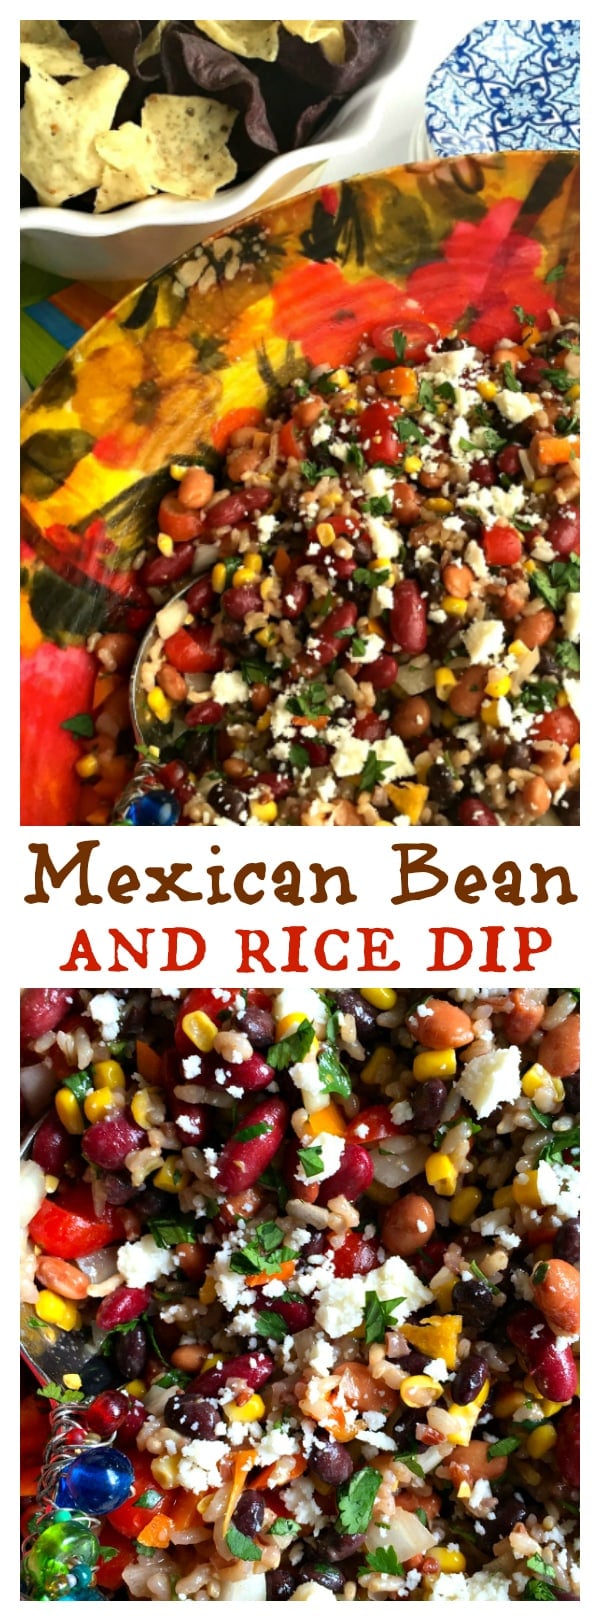 Mexican Bean and Rice Dip